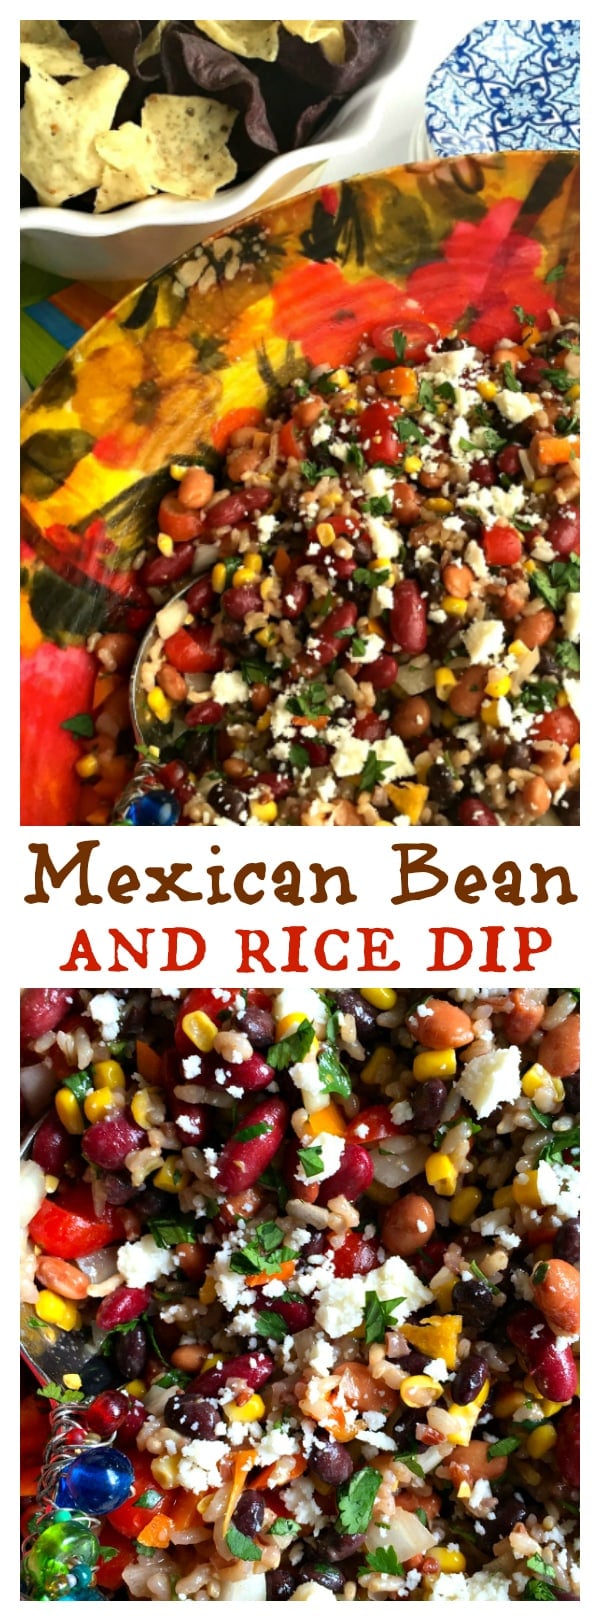 Mexican Bean and Rice Dip